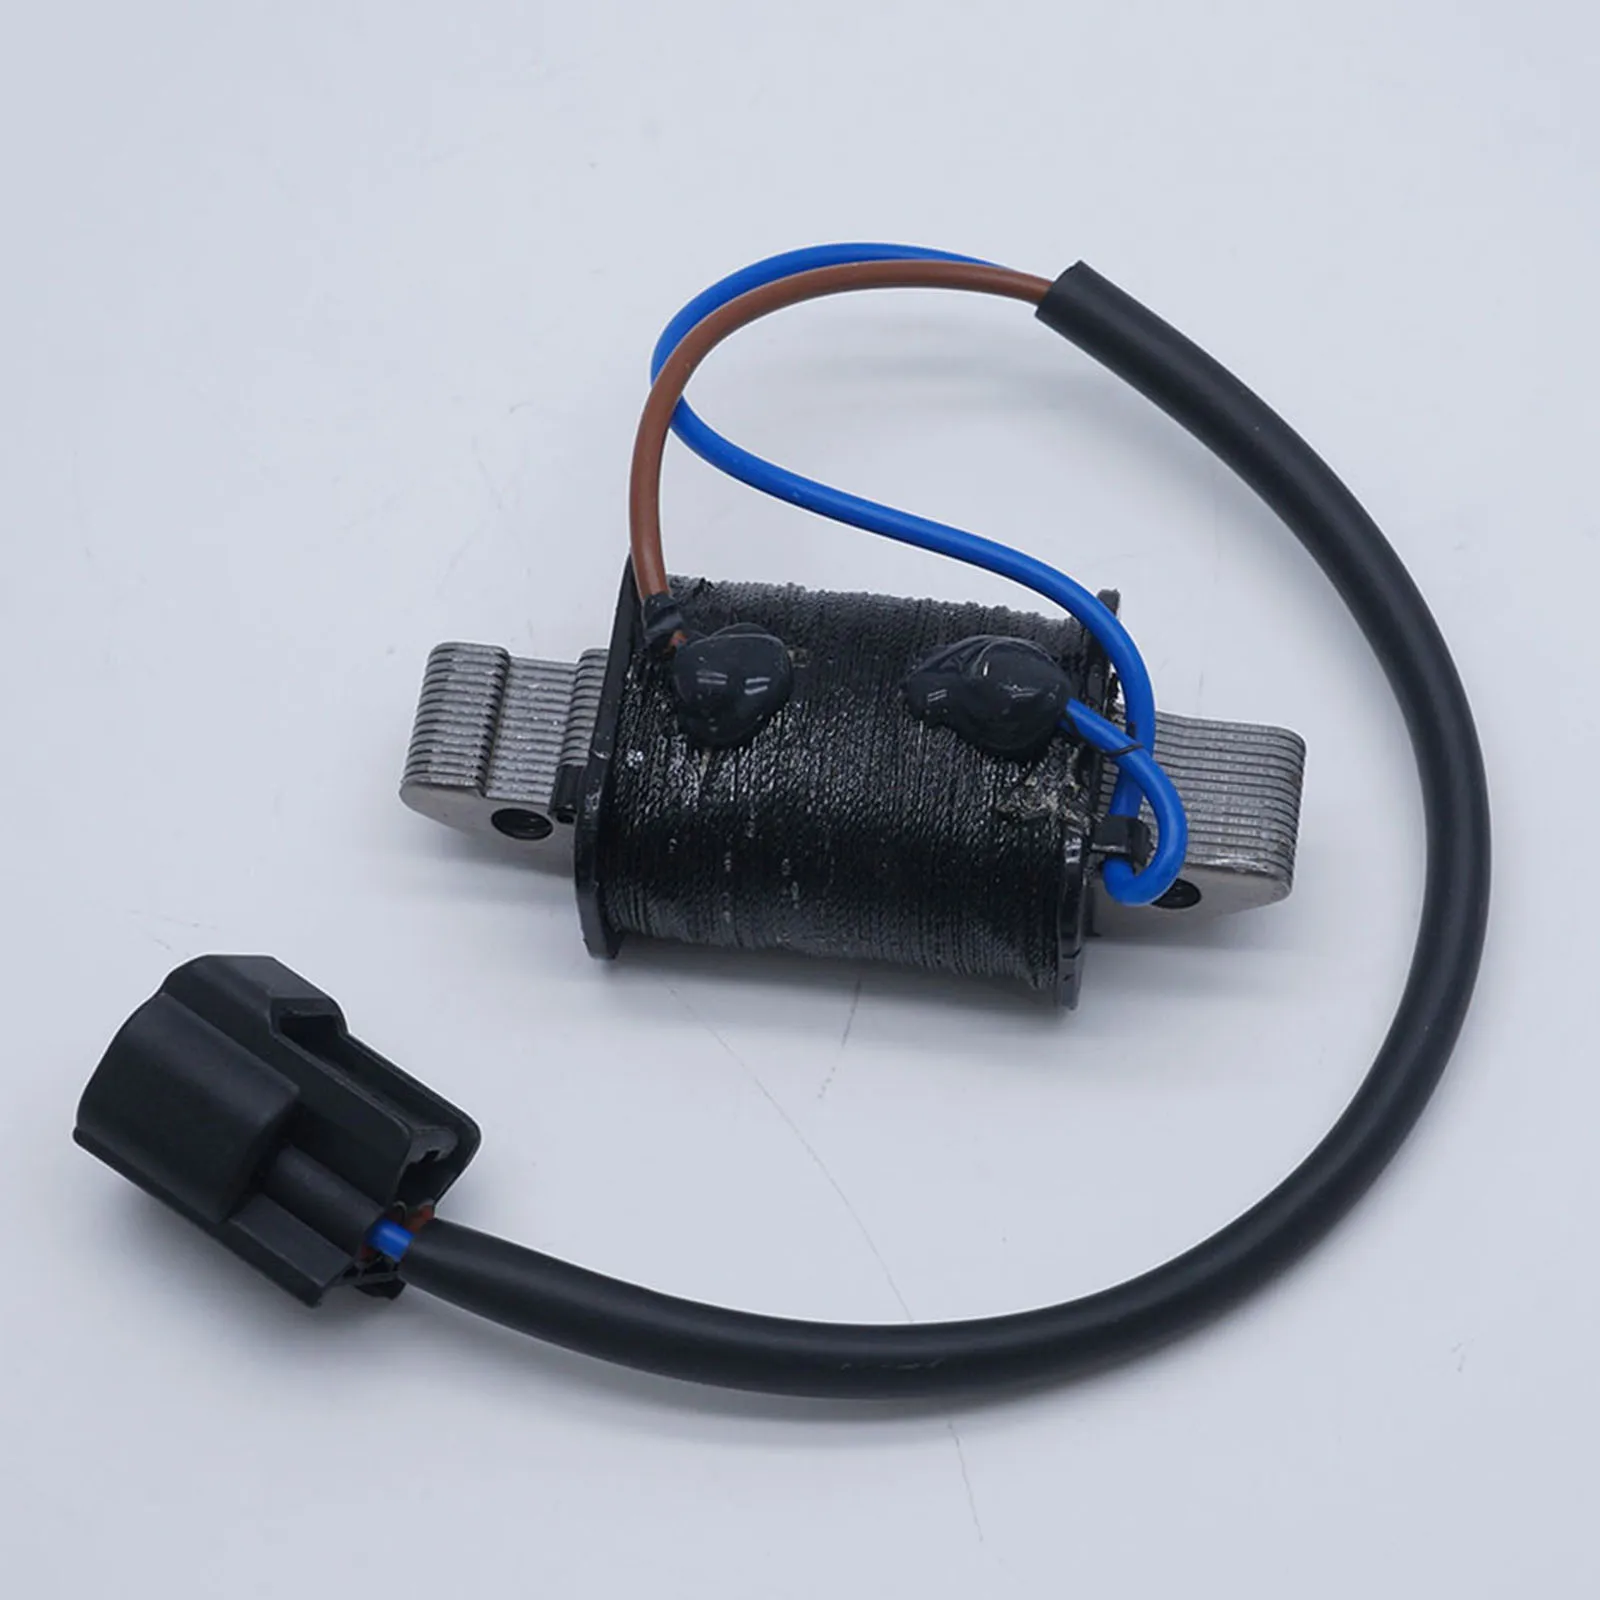 New Charge Coil for Yamaha Outboard Motor 70HP 60HP with Plug 6H2-85520-01-00, Perfect replacement for you old or broken part.